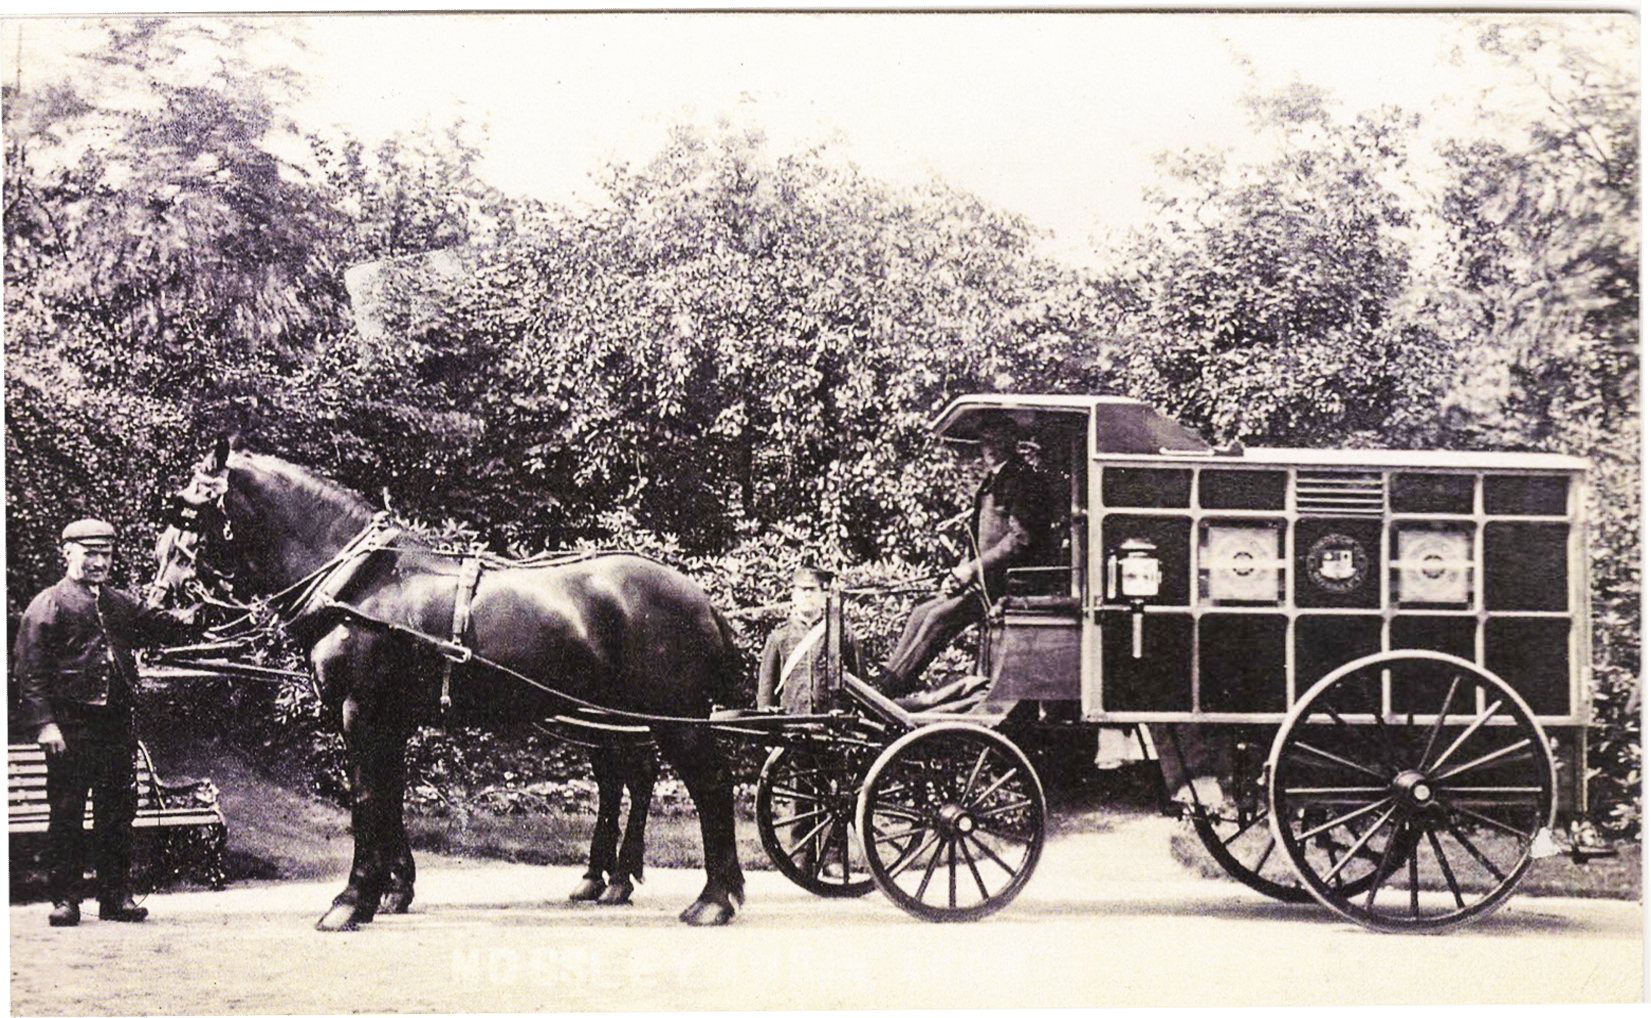 Photo of police horse and cart